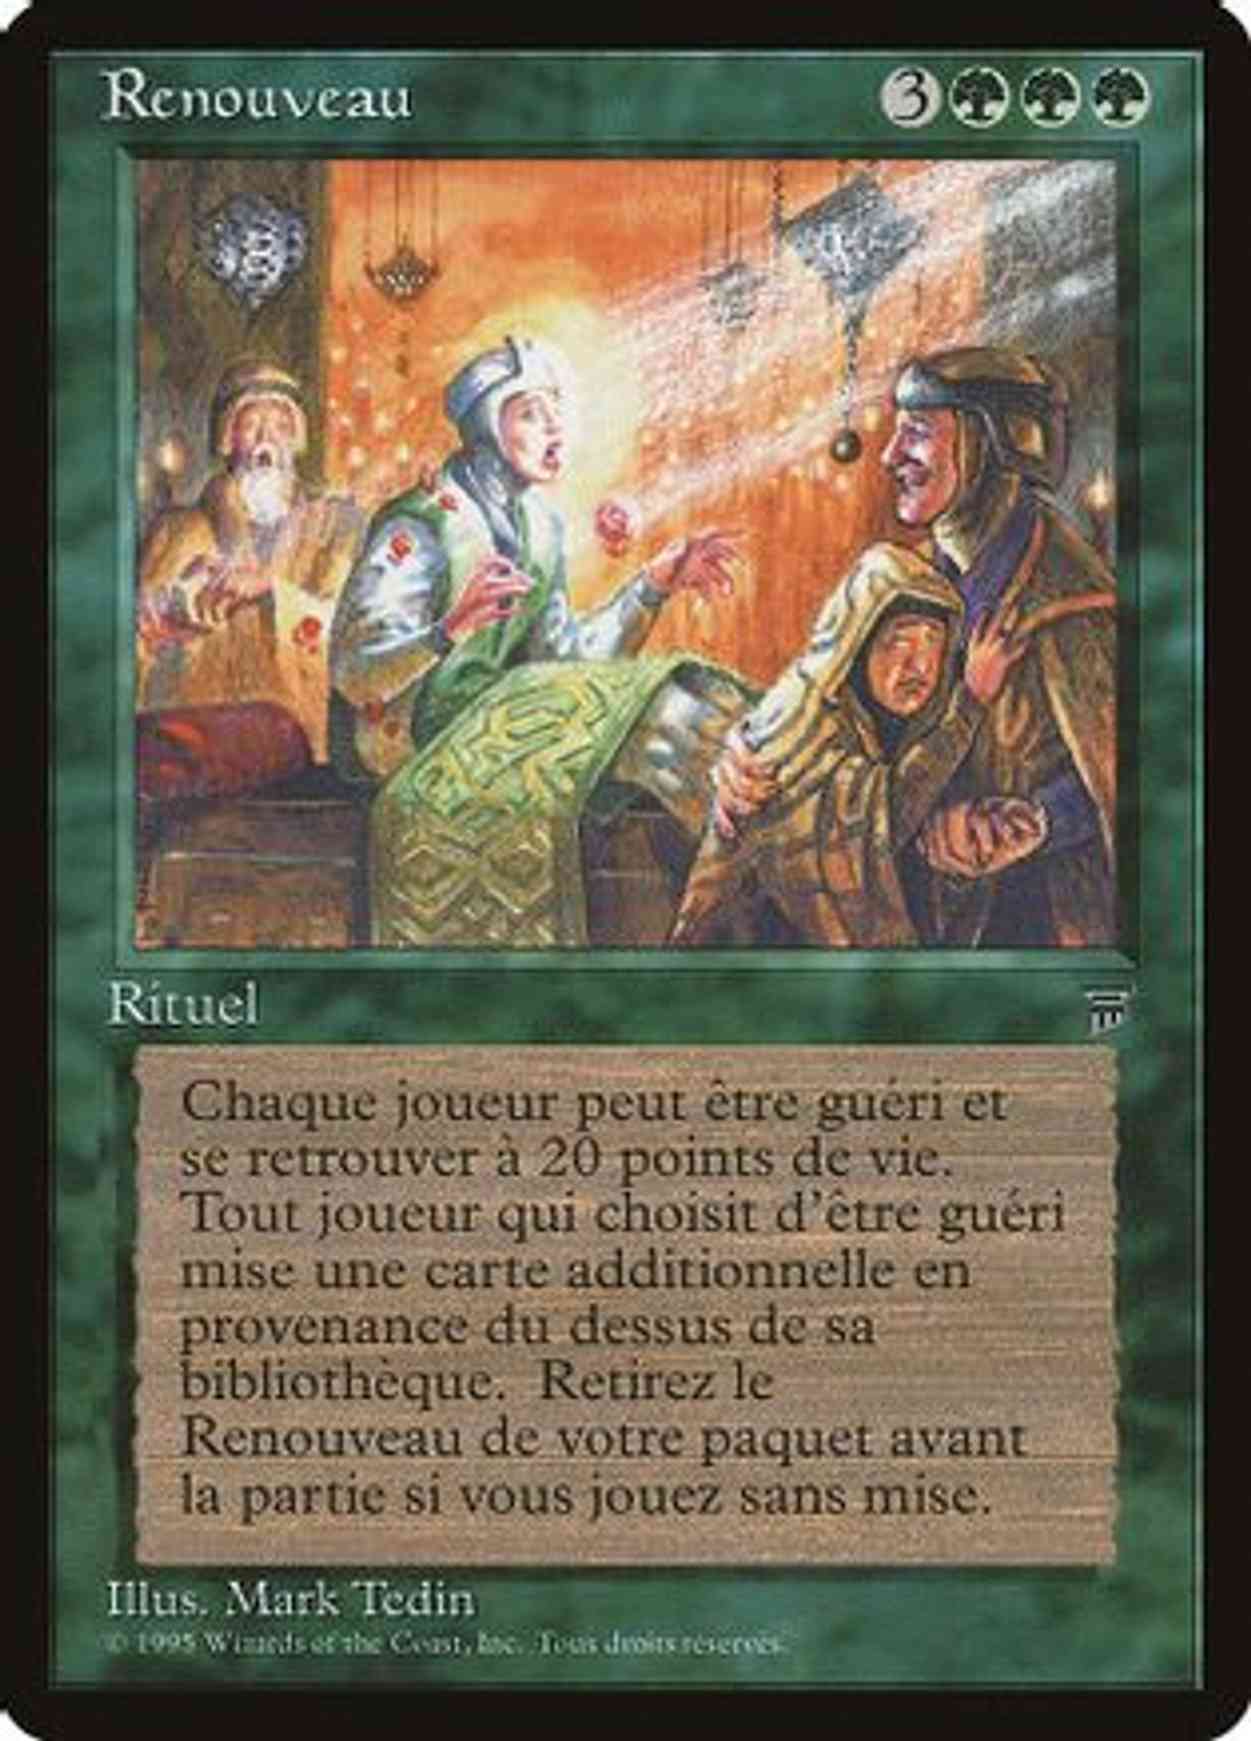 Rebirth (French) - "Renouveau" magic card front